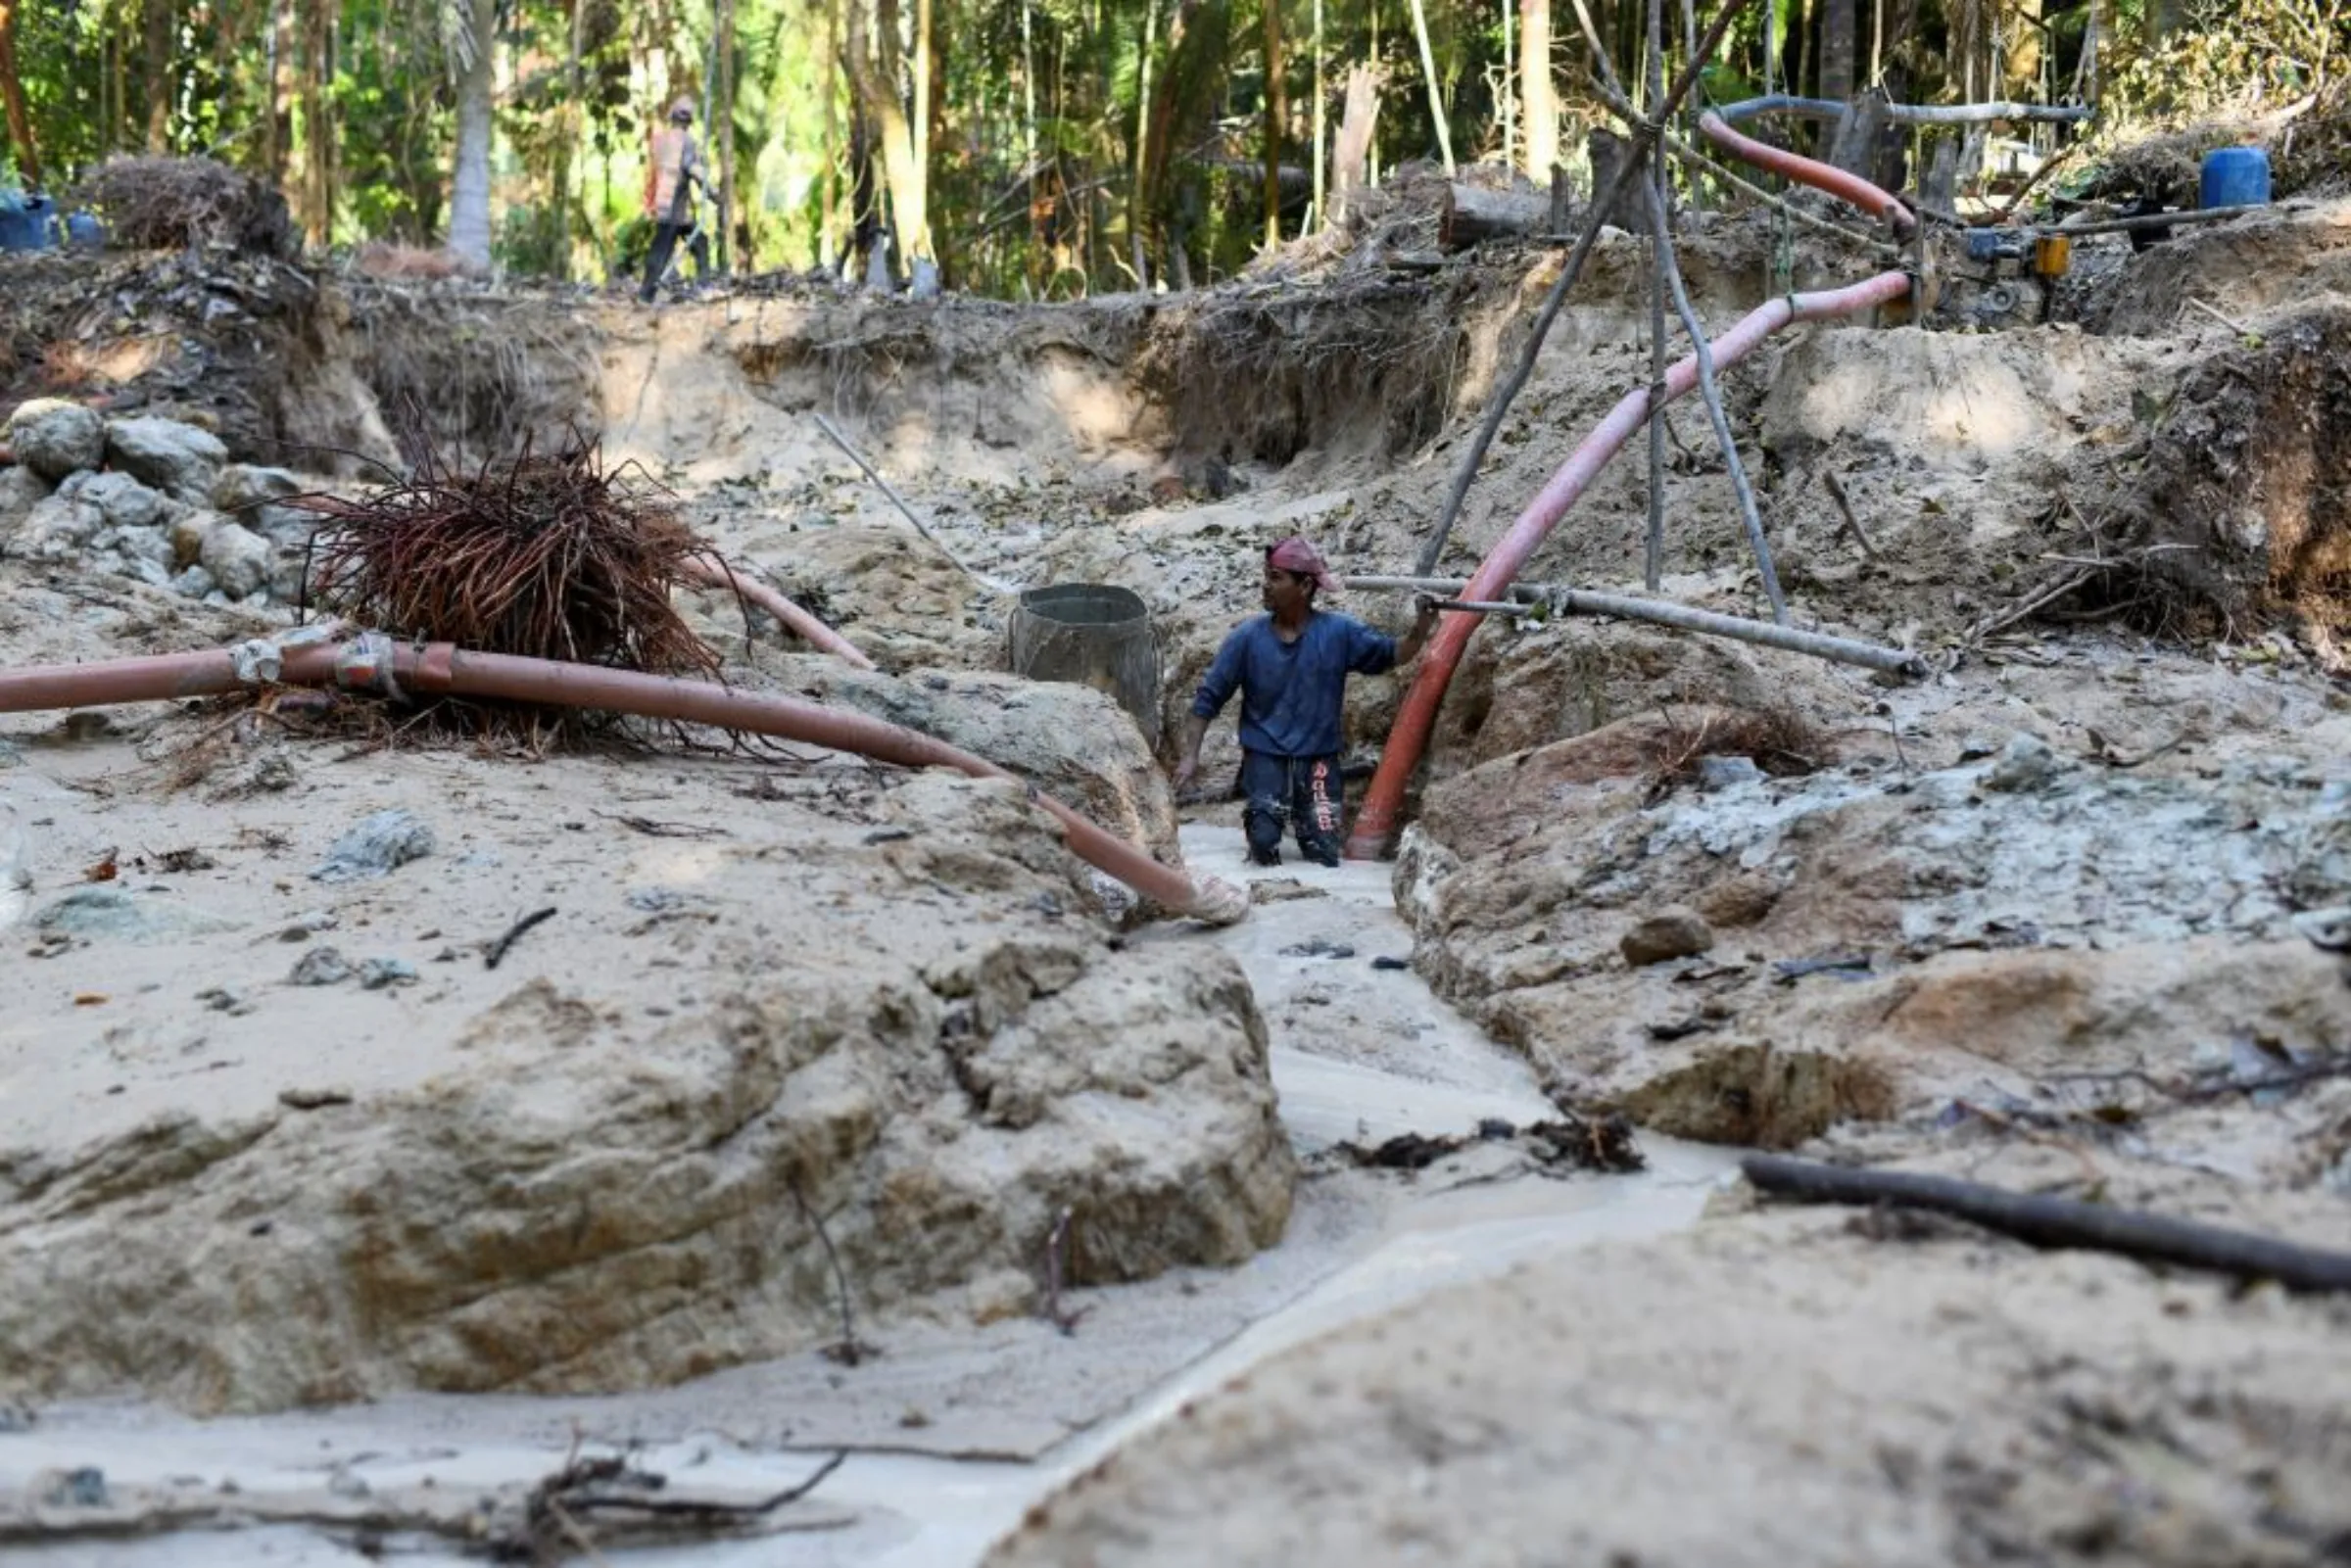 A miner works in an illegal gold mine at an environmental preservation area in the Amazon rainforest, in Itaituba, Para state, Brazil September 3, 2021